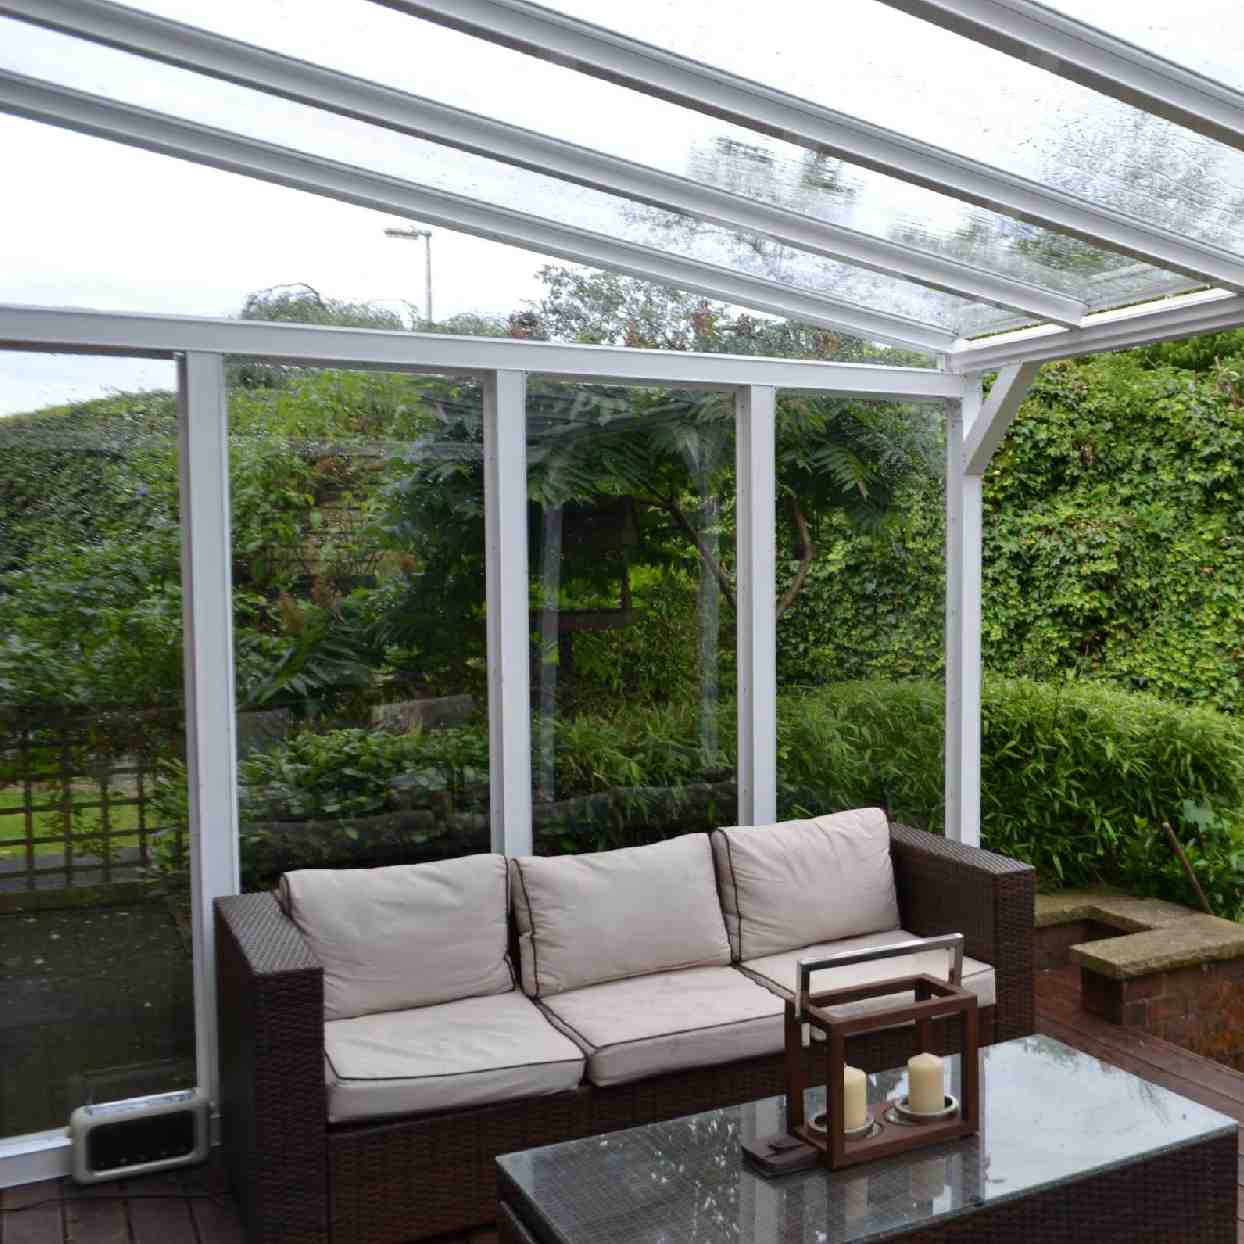 Buy Omega Verandah White with 6mm Glass Clear Plate Polycarbonate Glazing - 3.1m (W) x 4.0m (P), (2) Supporting Posts online today